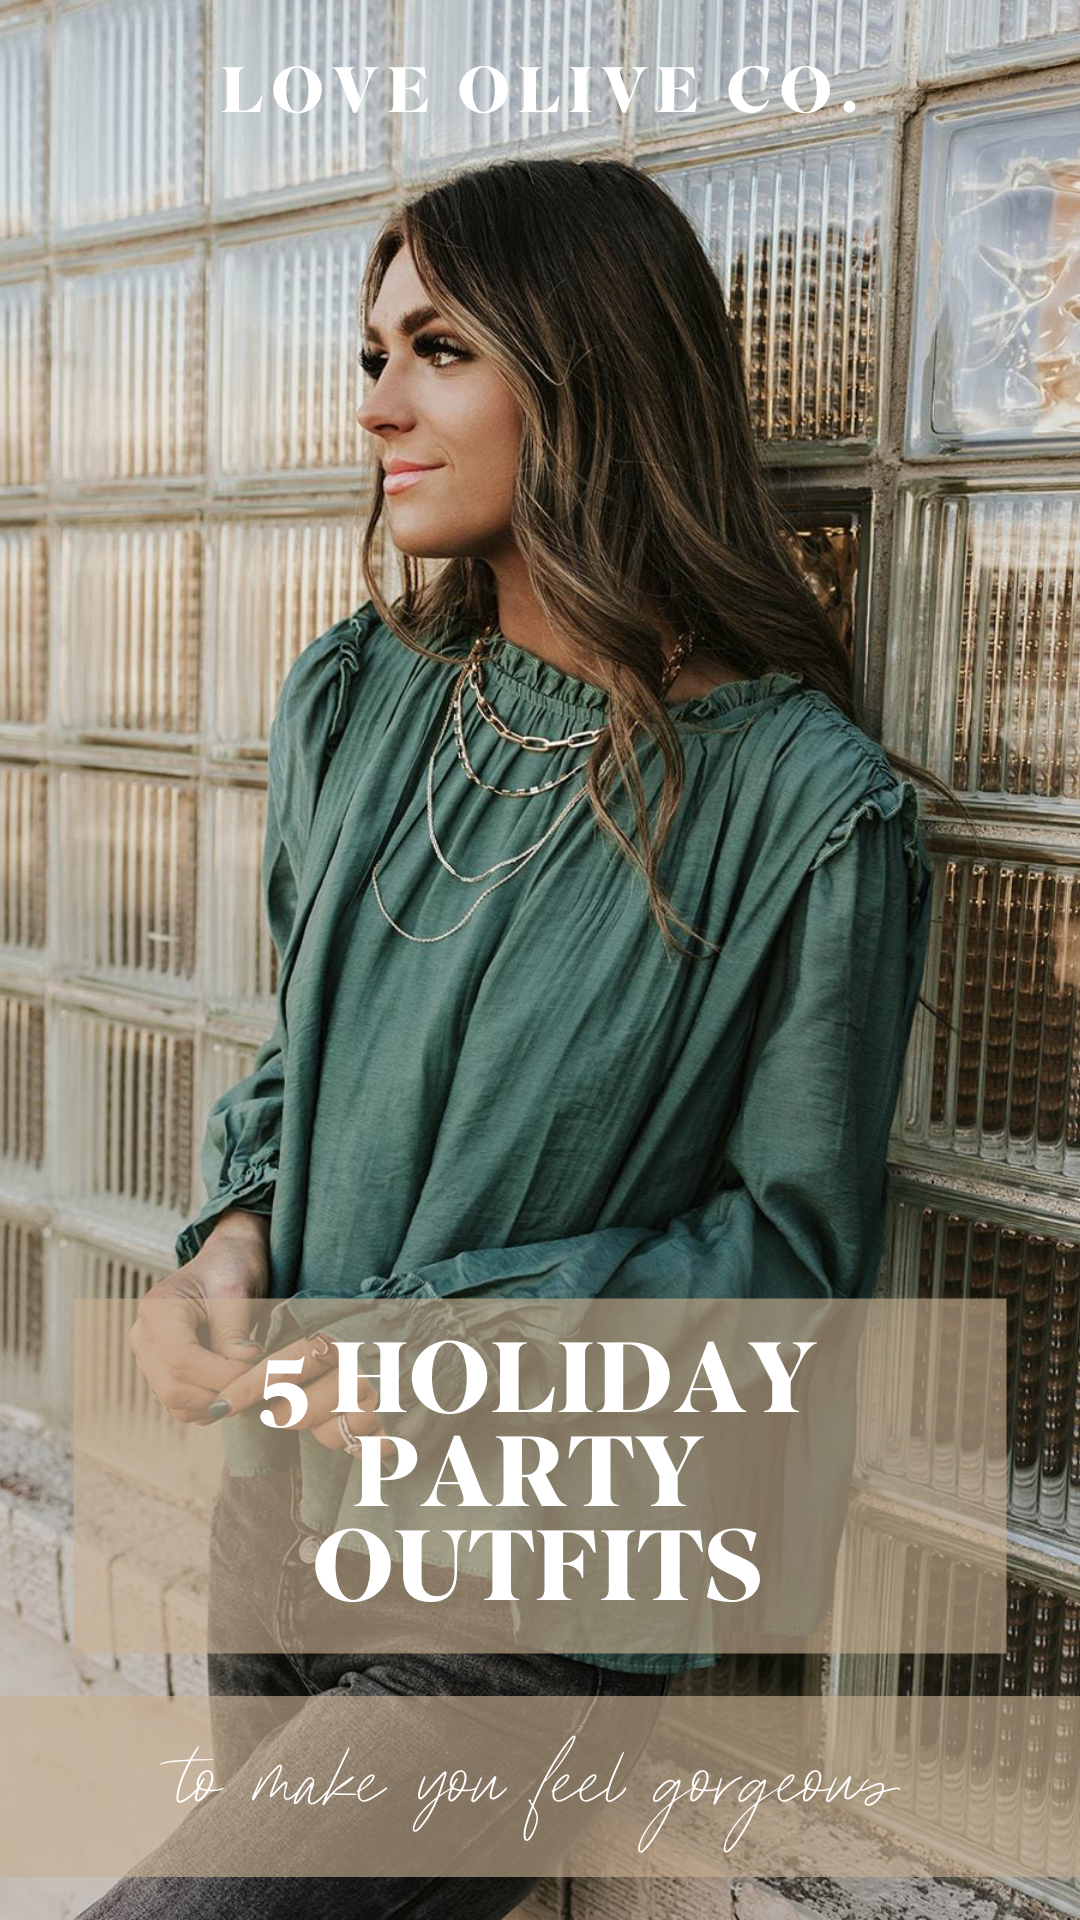 5 holiday party outfits to make you feel gorgeous. www.loveoliveco.com